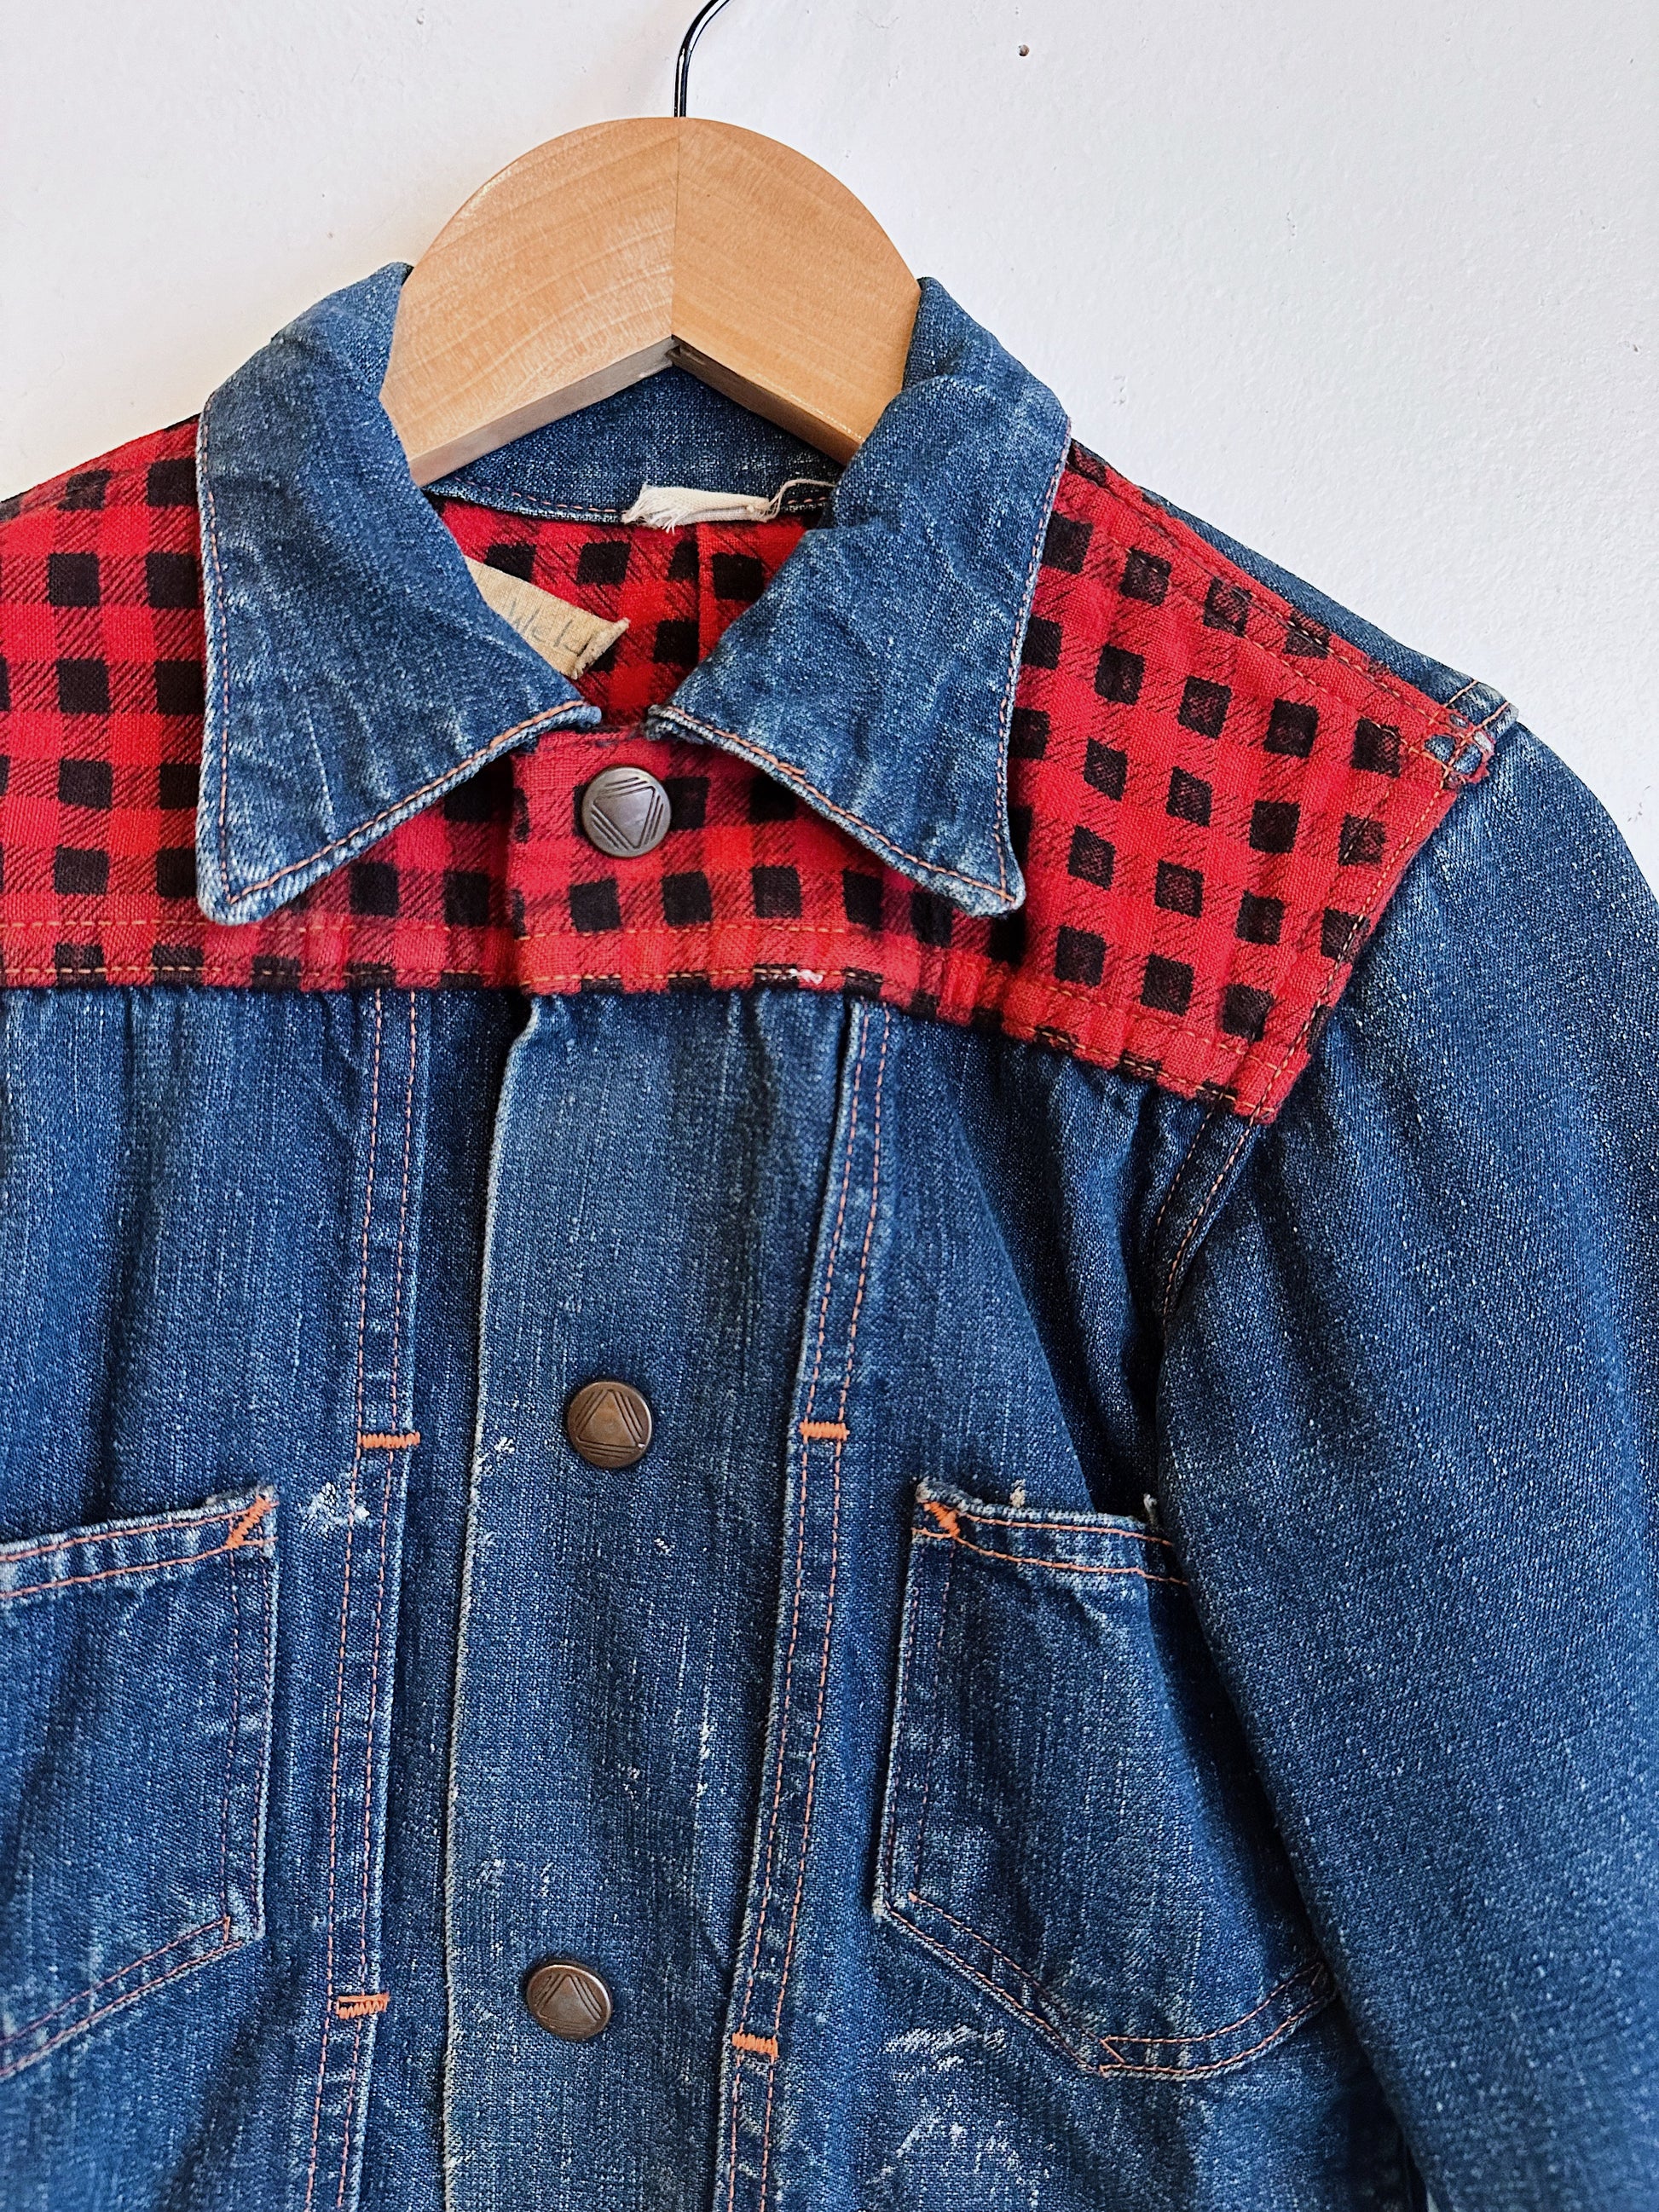 collar view with clothing tag showing flannel accents on collar 